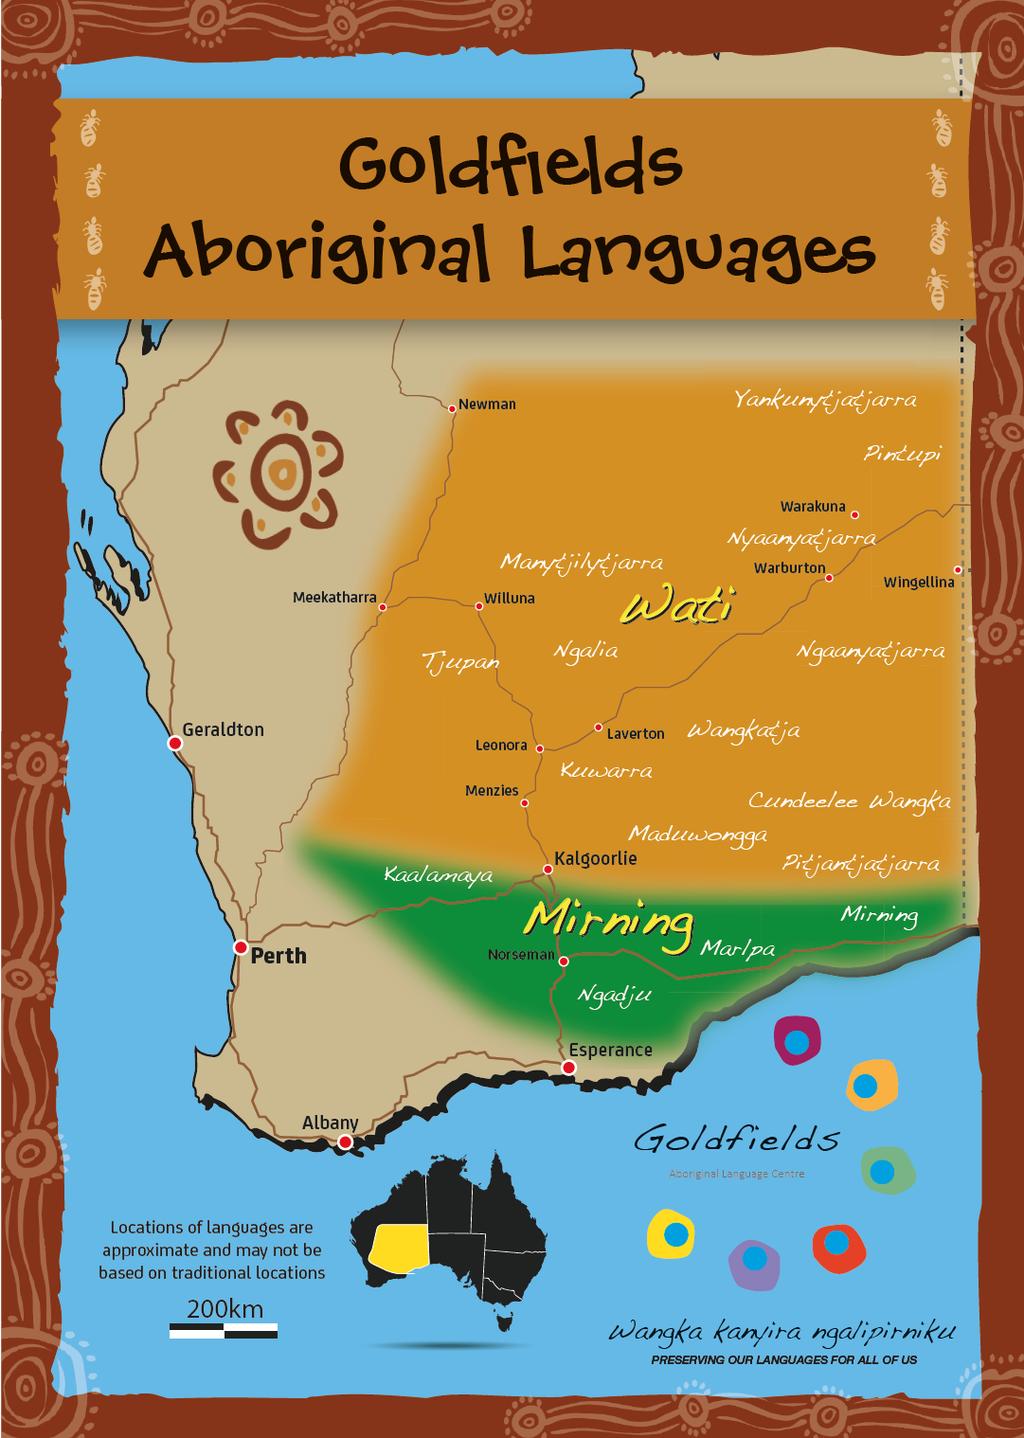 Goldfields Languages Map The languages names on this map are only indicative of location and may not represent the traditional location.